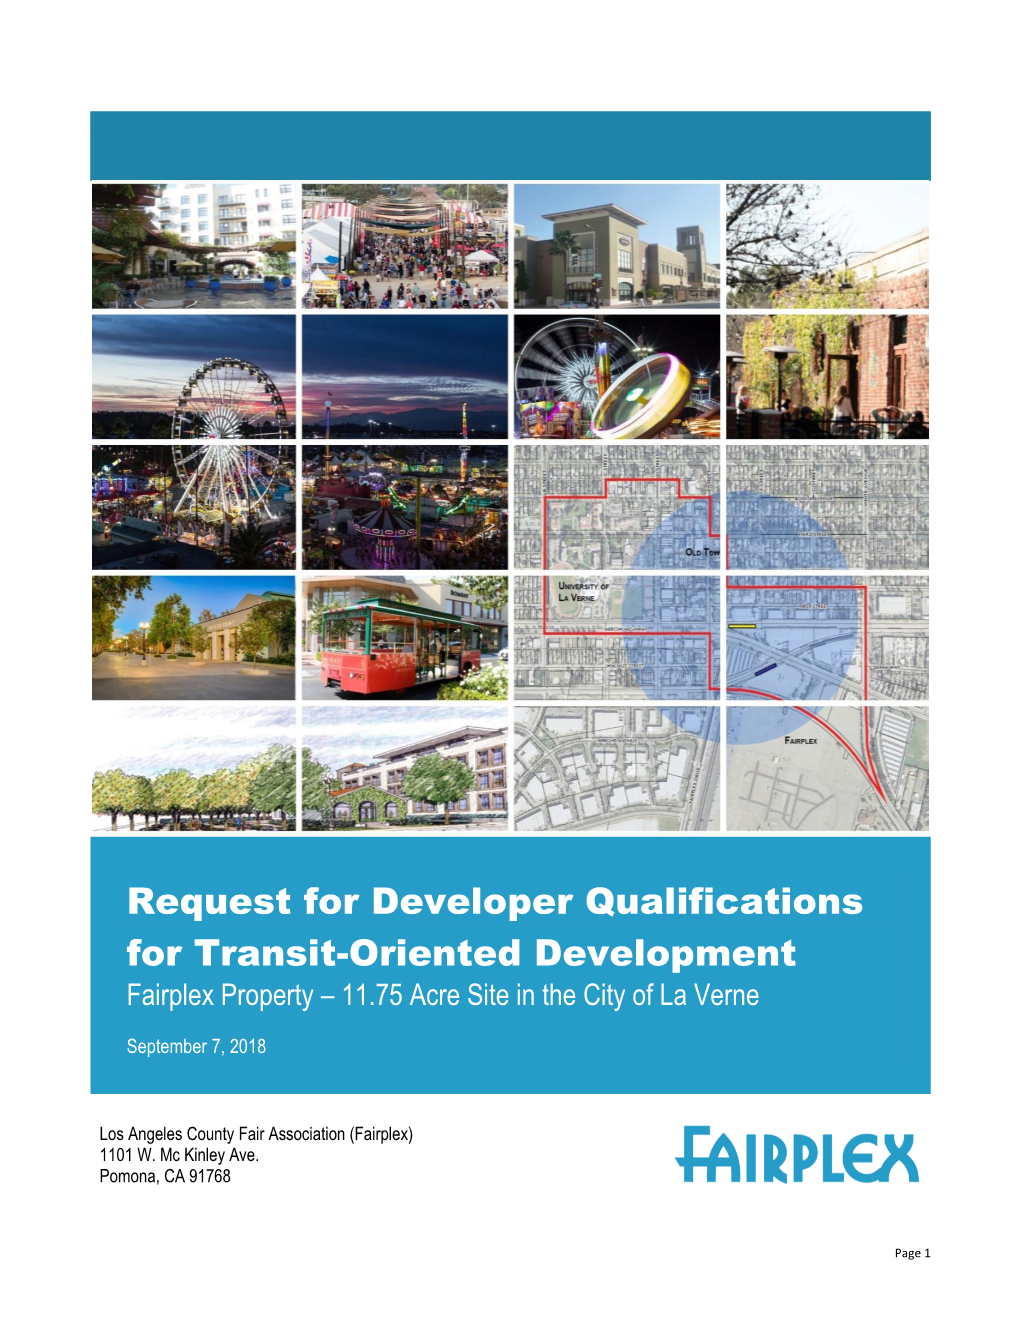 Request for Developer Qualifications for Transit-Oriented Development Fairplex Property – 11.75 Acre Site in the City of La Verne